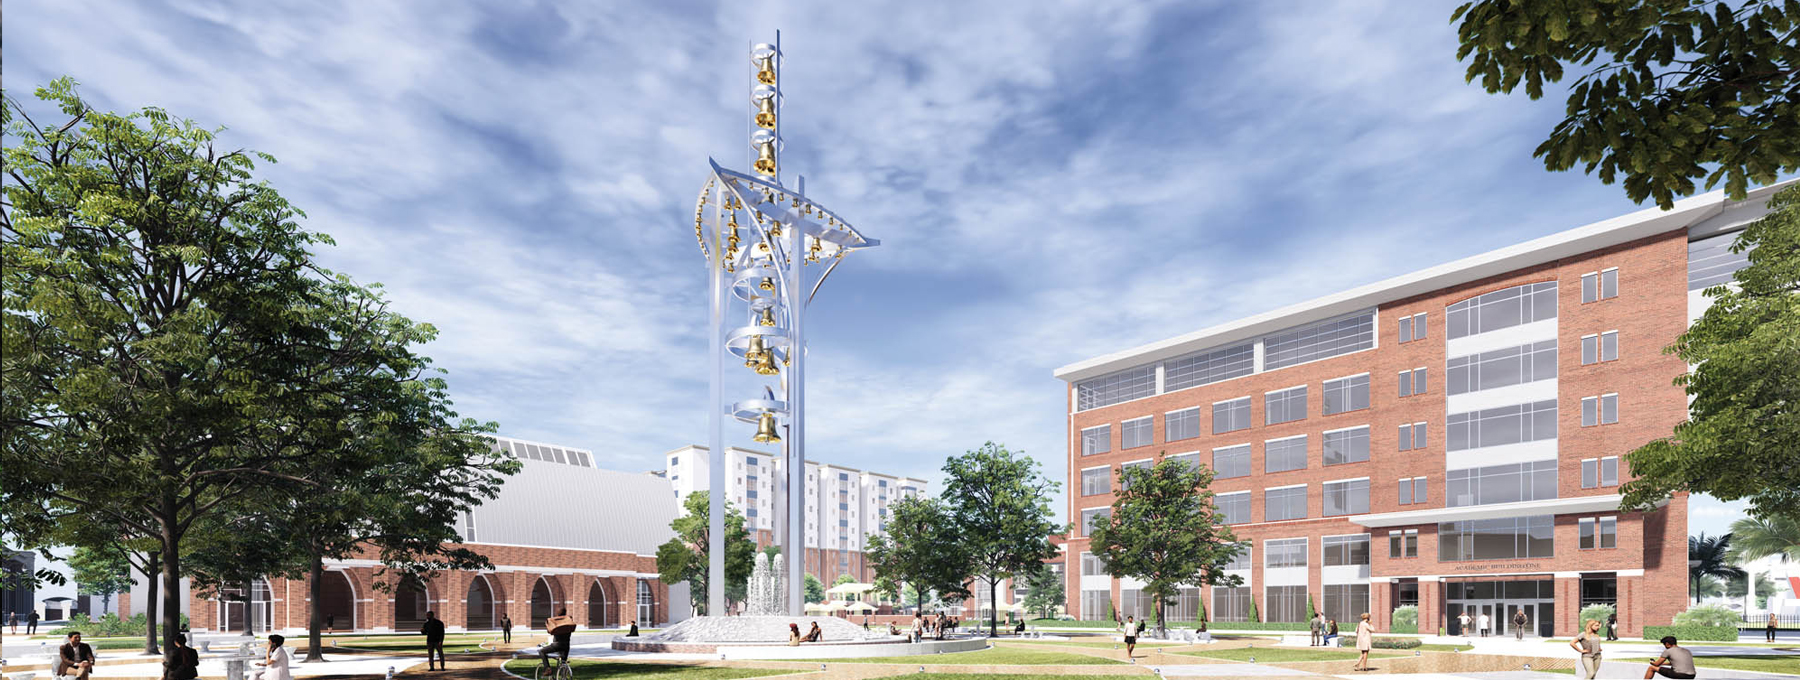 Rendering of Ars Sonora on campus